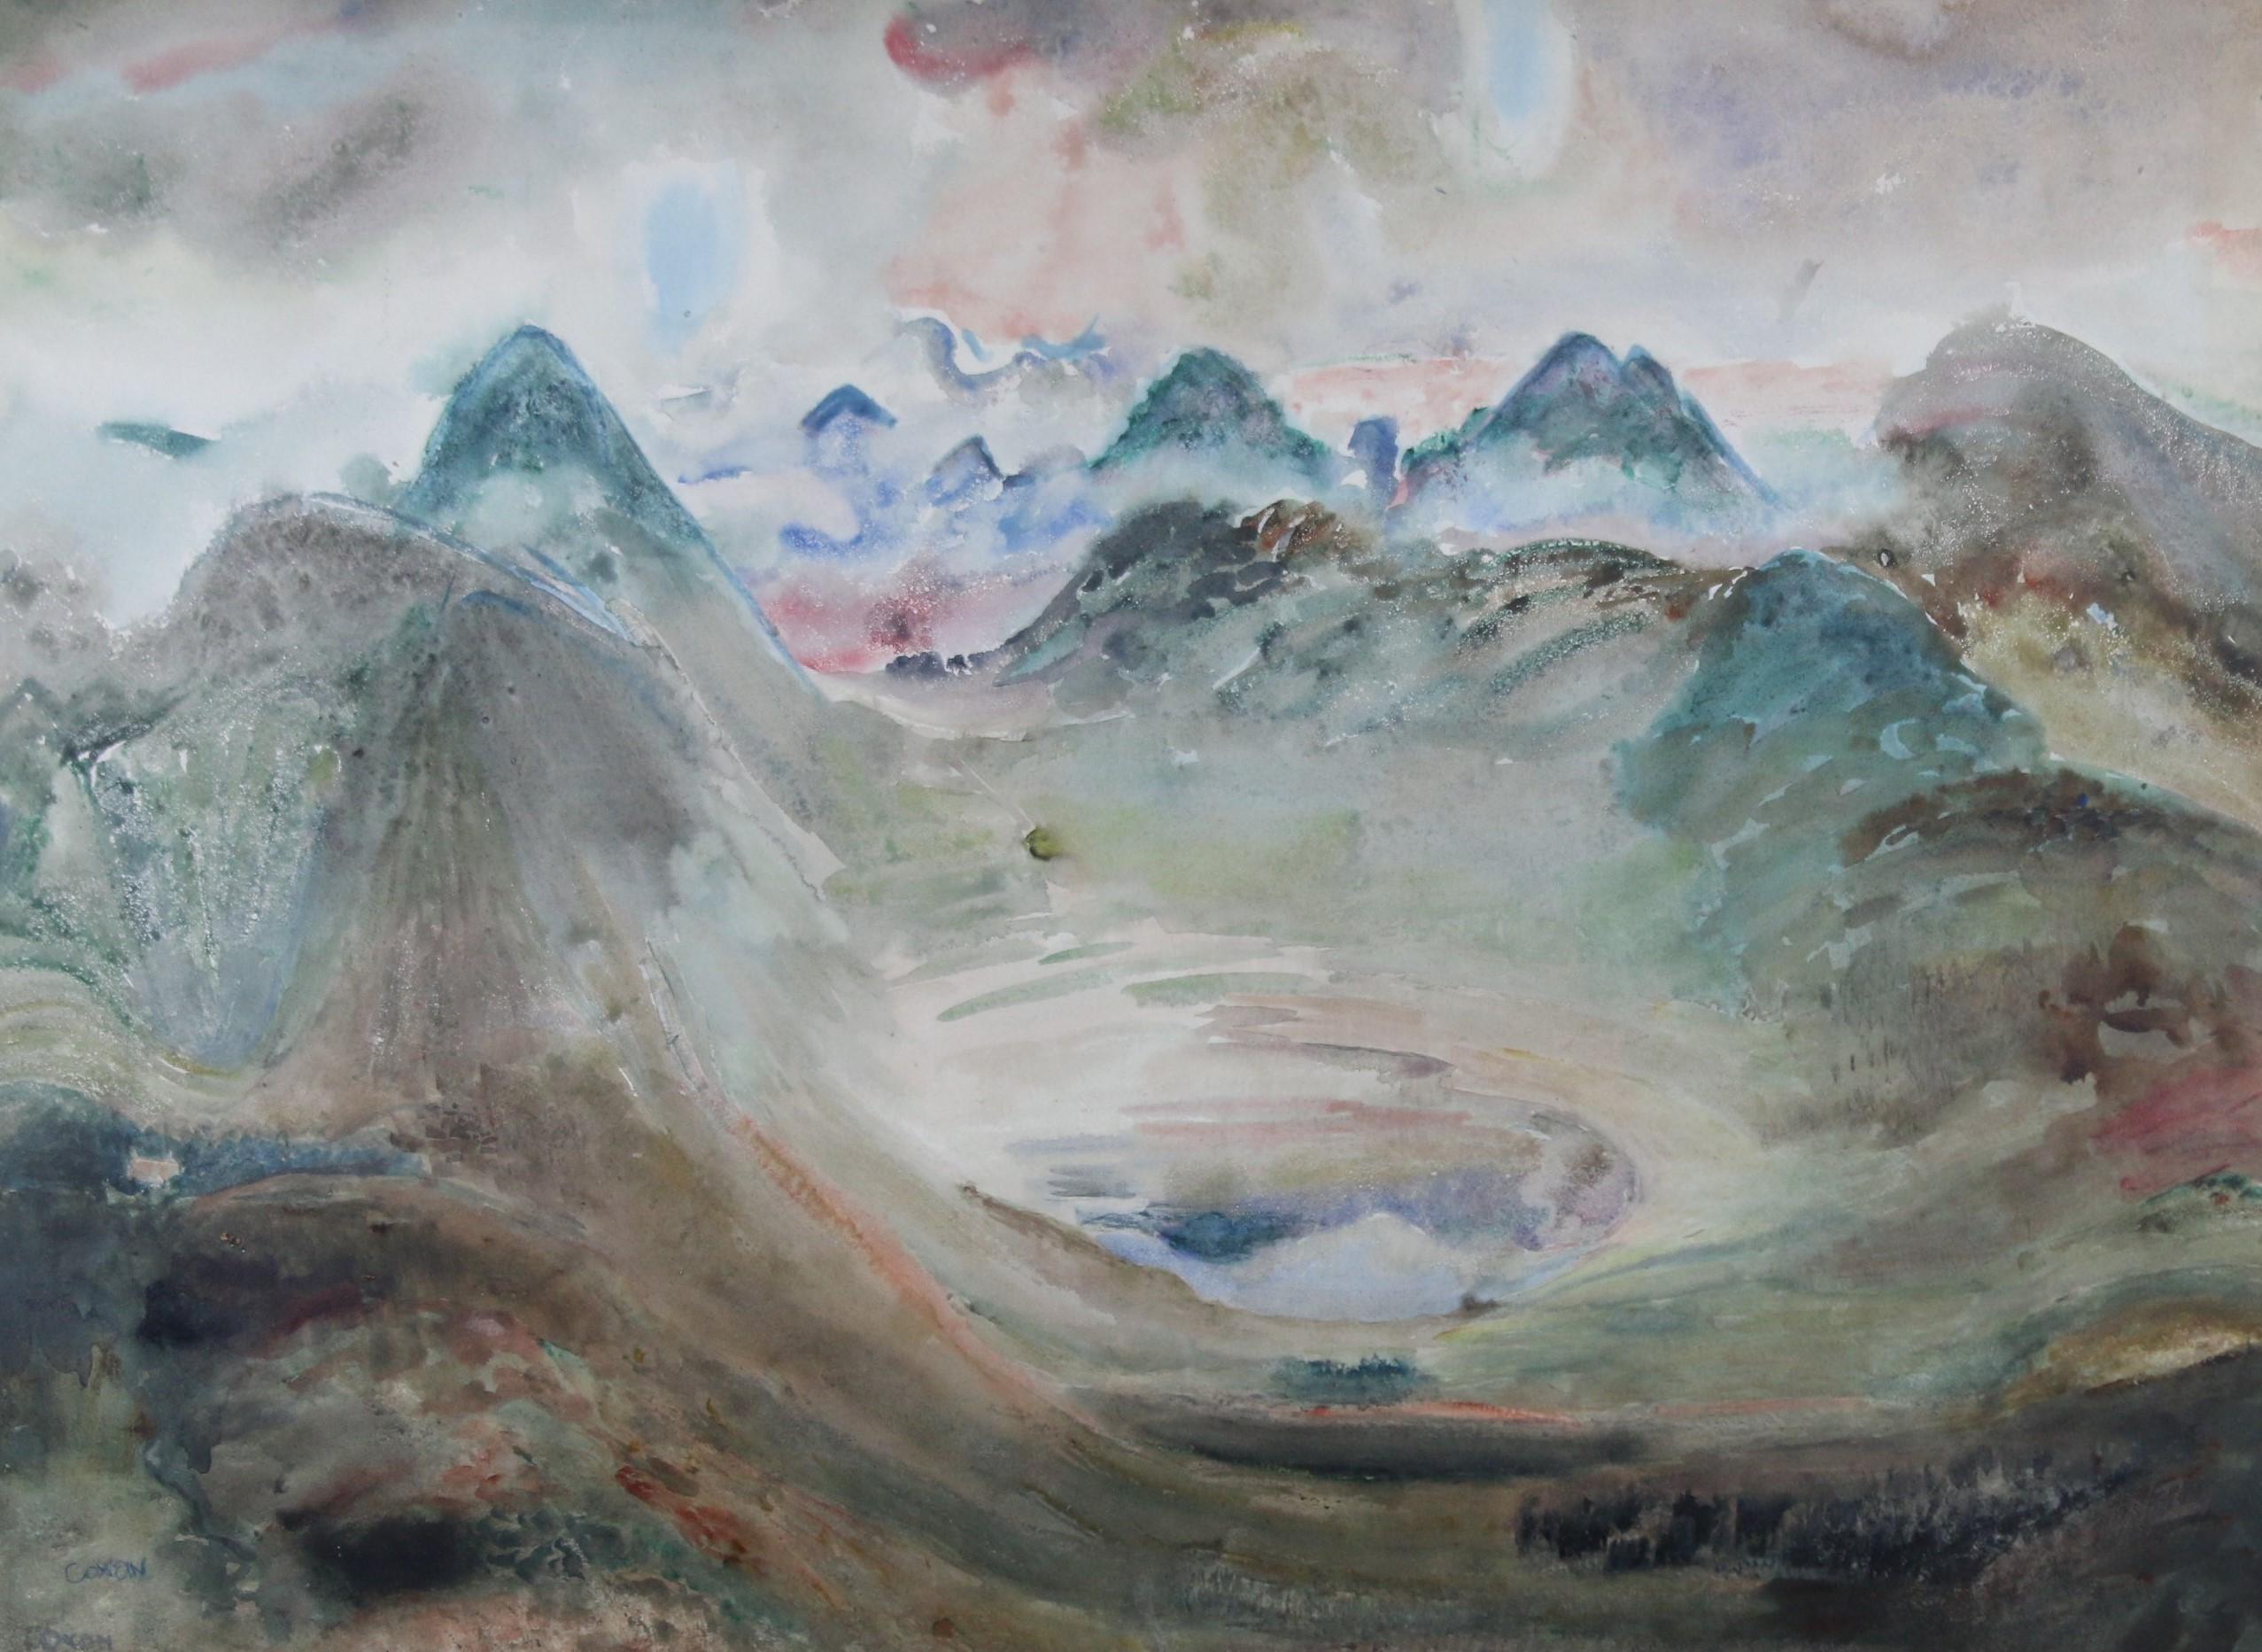 Surreal Mountainous Landscape of the Pyrenees - Painting by Raymond Coxon